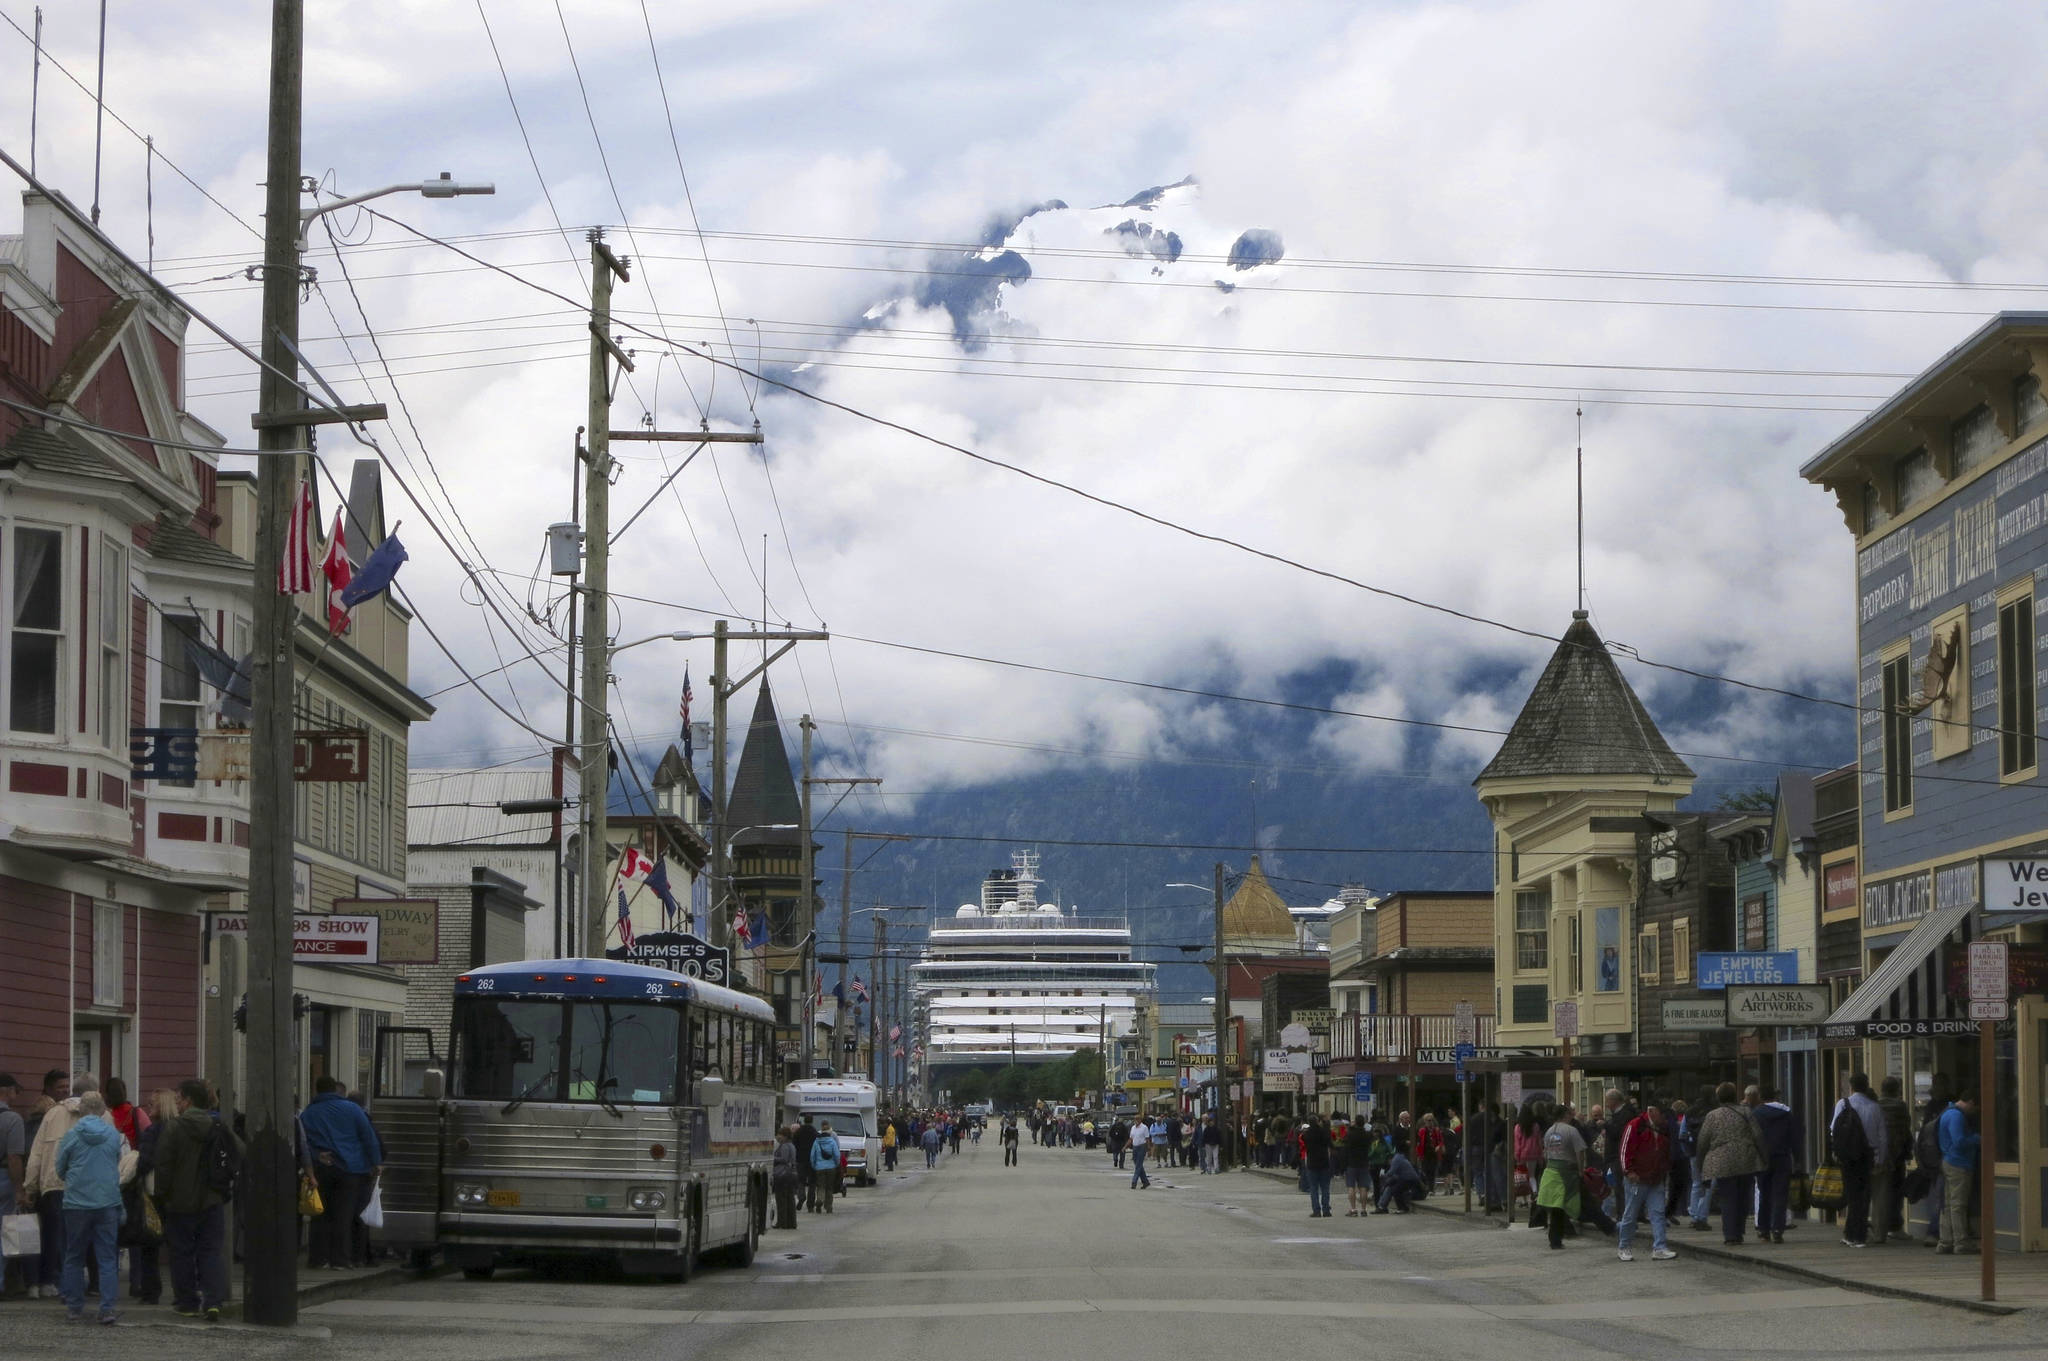 This July 2014 photo shows a cruise ship docked in Skagway, Alaska, as passengers tour the town. The Alaska port city, nearly entirely dependent upon cruise ship tourism, wants to share its federal coronavirus relief funds with workers in town. The city of Skagway posted an application on its website inviting residents to apply for up to $1,000 in relief funds to help with bills. Nearly half of Alaska’s 2.2 million tourists arrive on cruise ships, but most companies have canceled their summer seasons, leaving workers here without much relief. (AP Photo | Kathy Matheson)